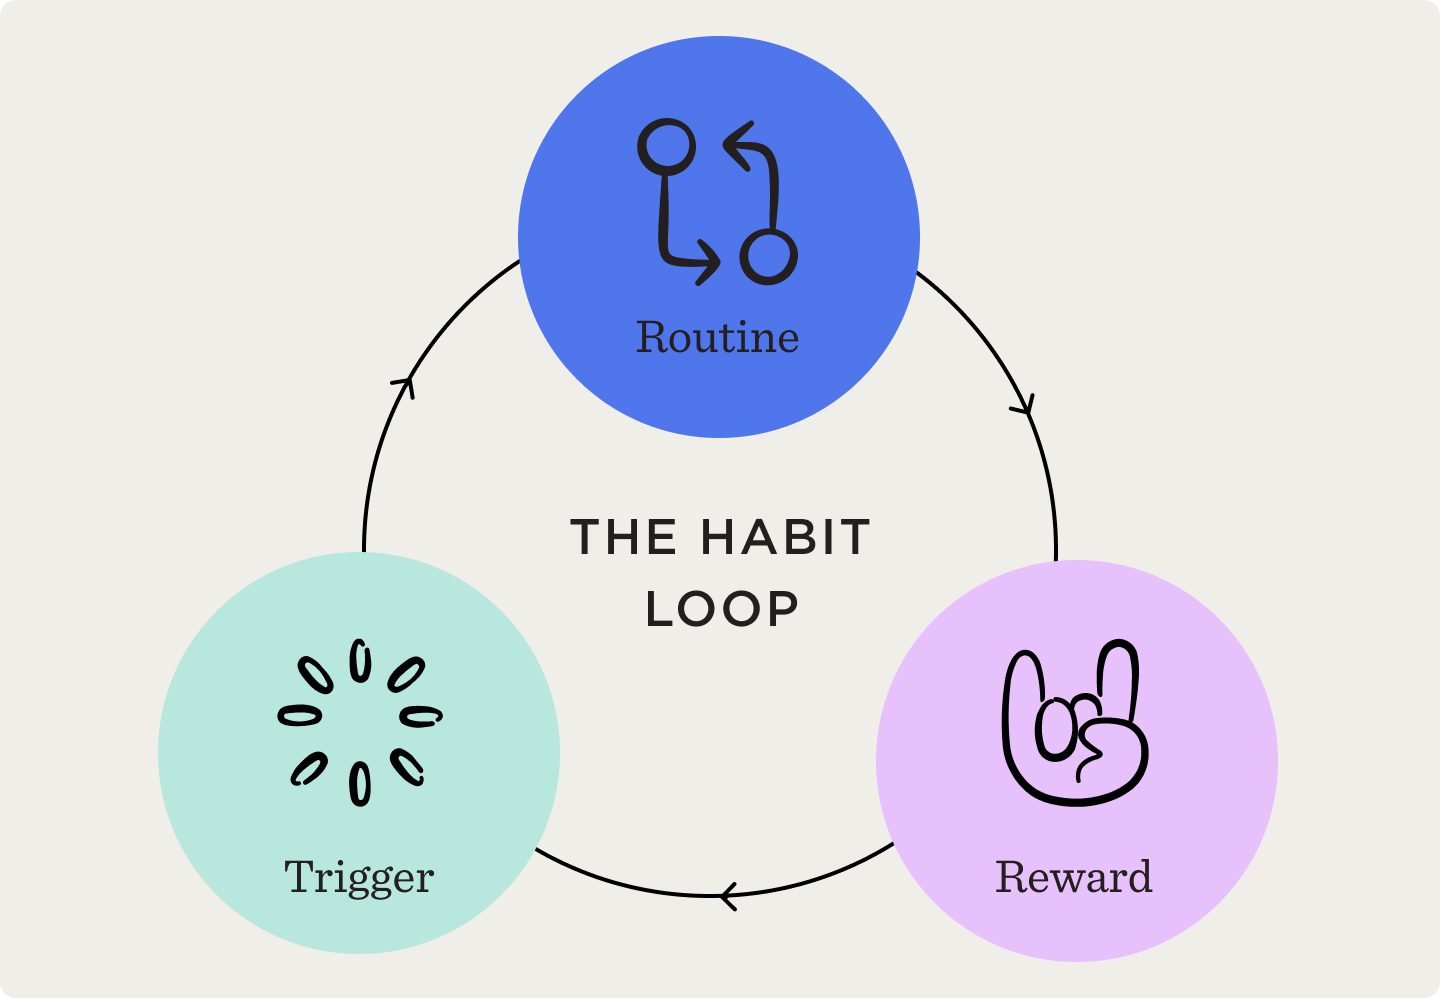 Diagram of the habit loop with circular arrows connecting Trigger, Routine and Reward.